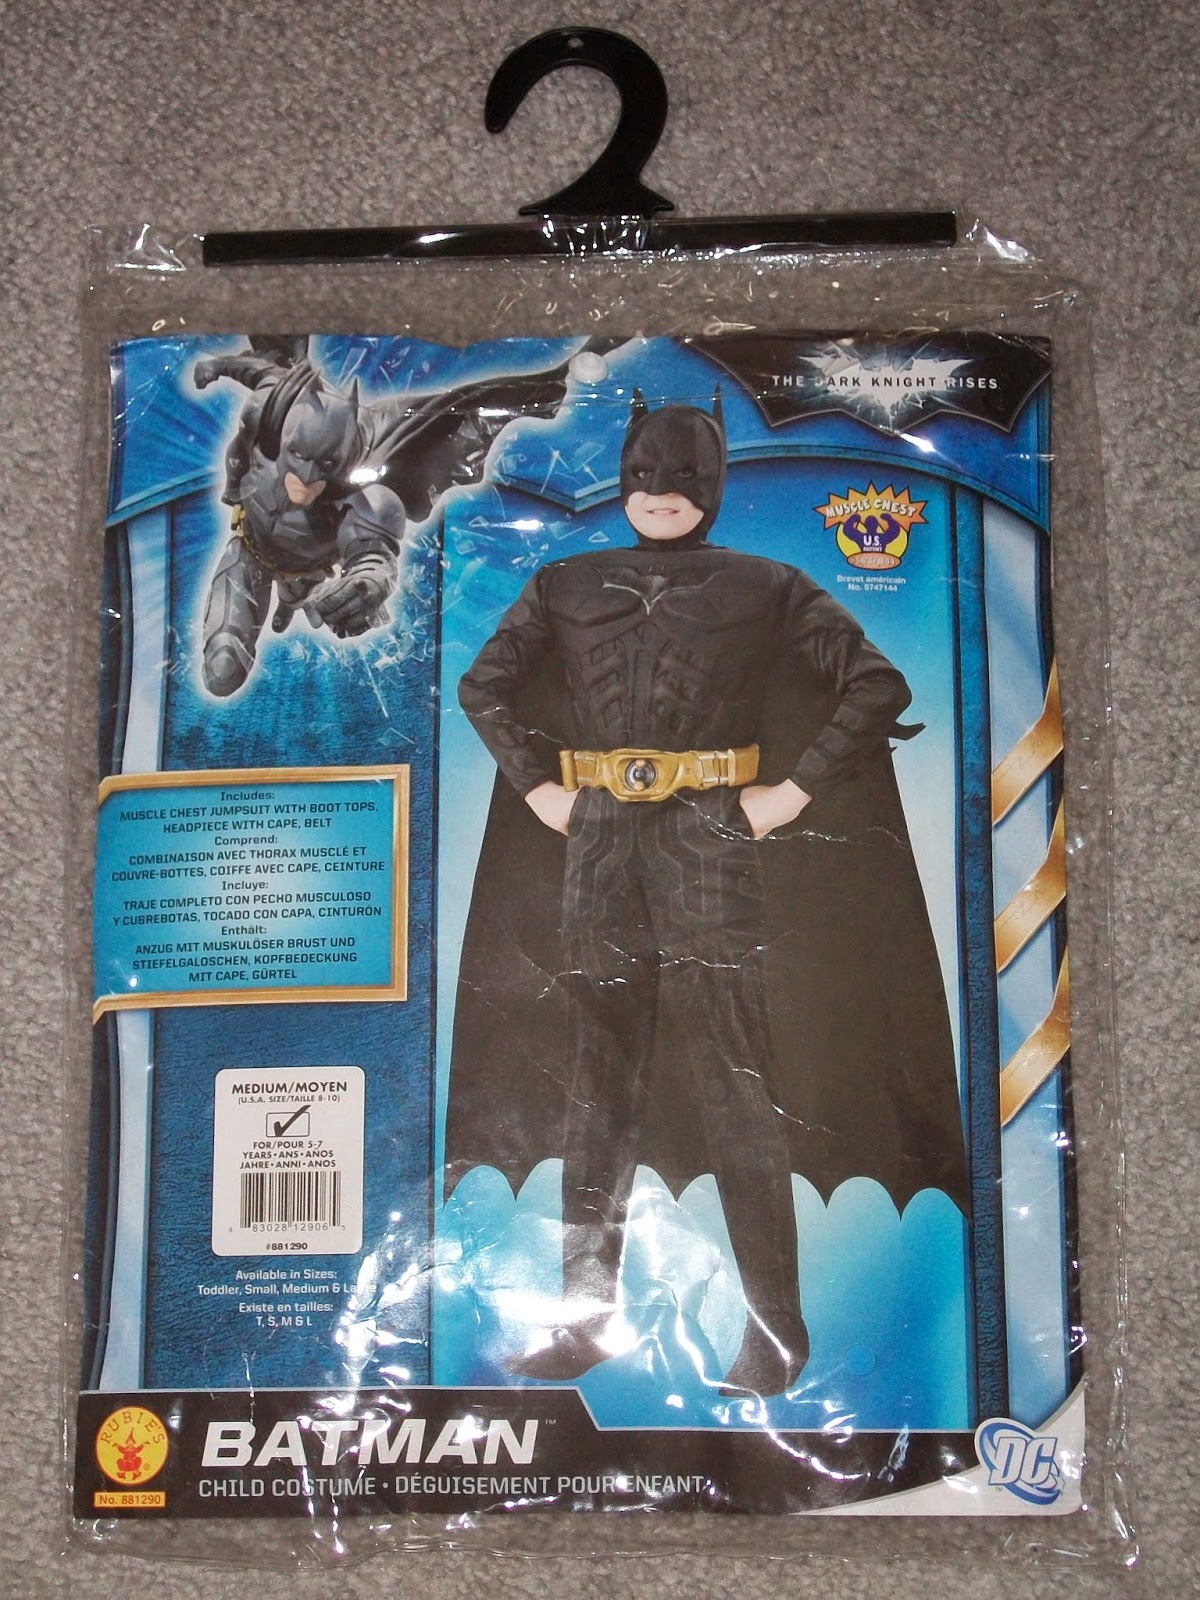 Mom Knows Best: Wholesale Costume Club Has Batman Costumes At WholeSale  Prices